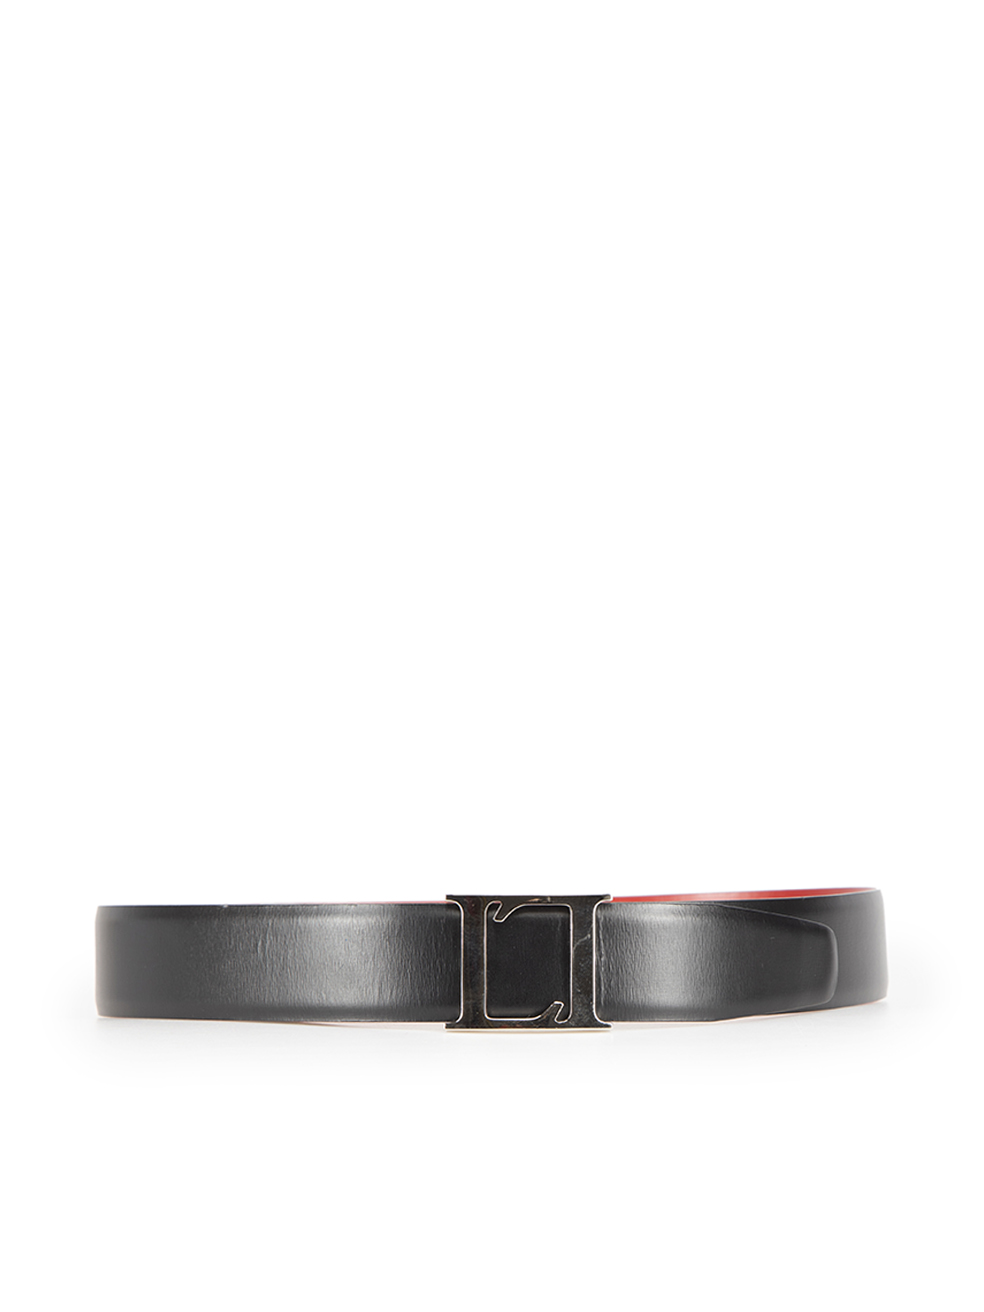 Salvatore Ferragamo - Authenticated Belt - Leather Black for Men, Never Worn, with Tag